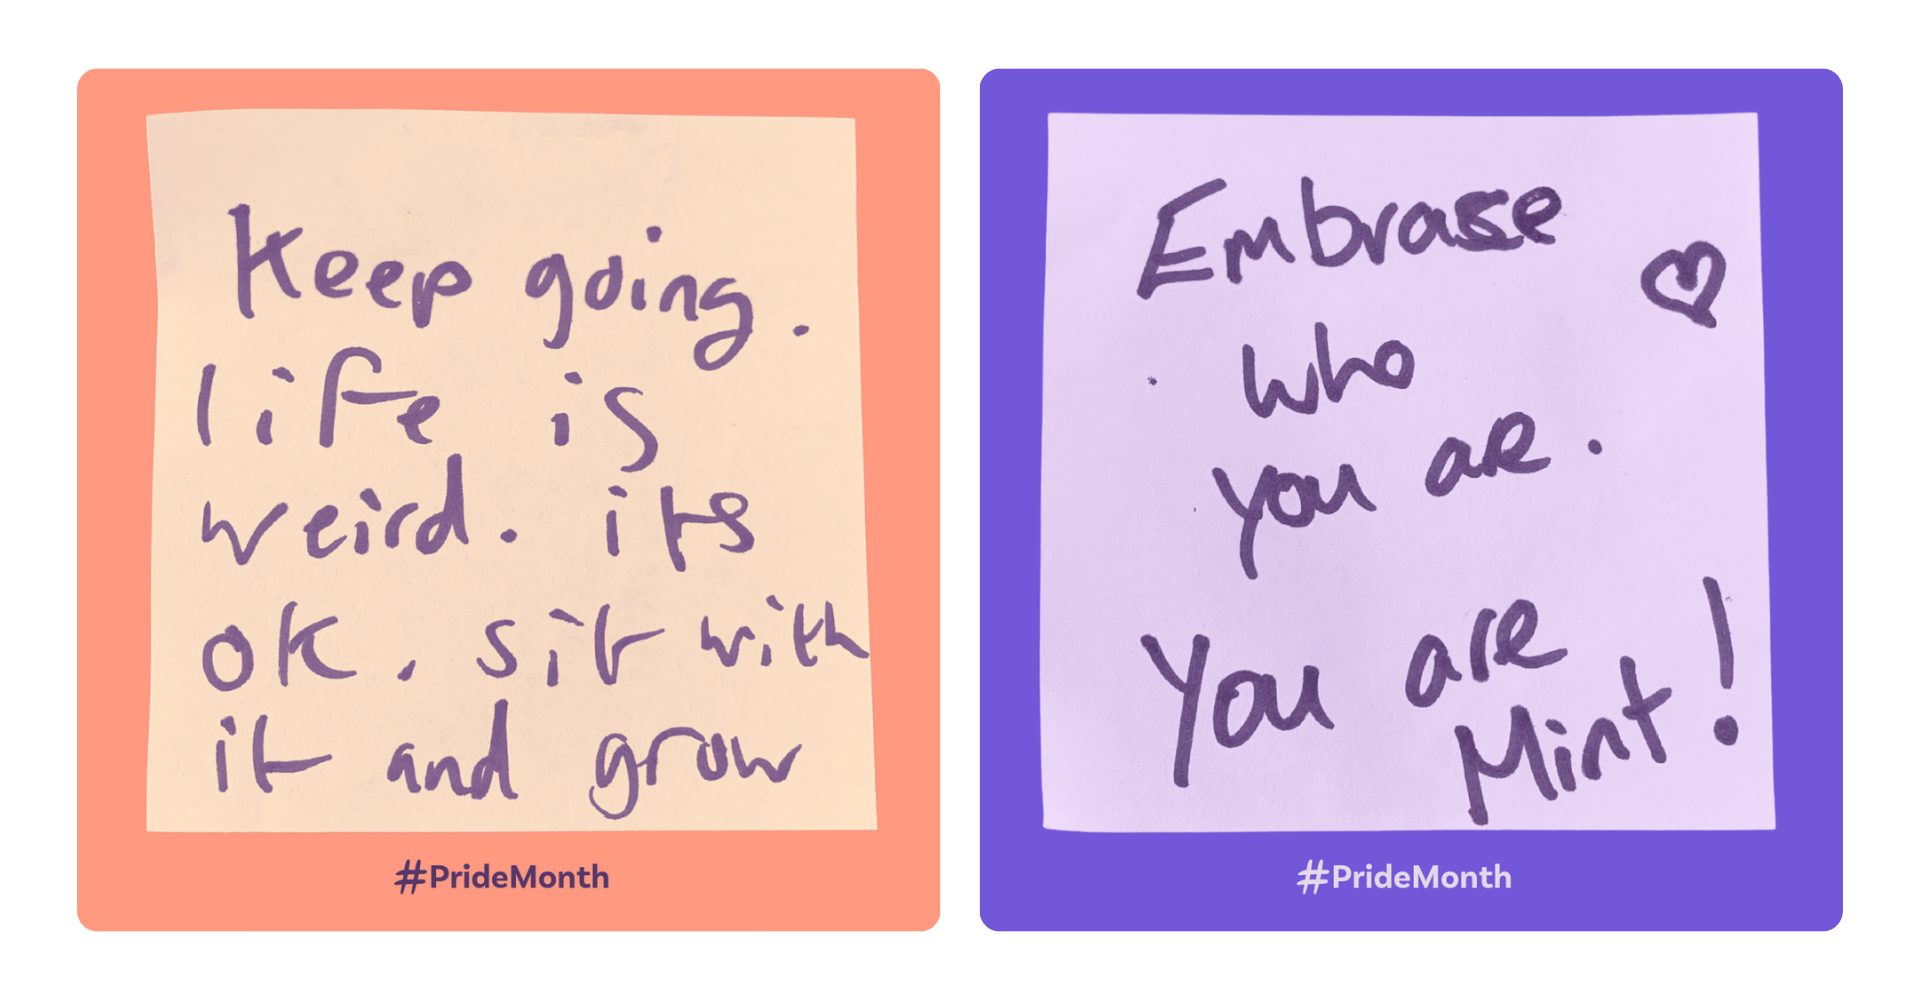 Two images of post-it notes with writing on them. Note 1 reads: "Keep going. Life is weird. It's ok, sit with it and grow" Note 2 reads: "Embrace who you are. You are mint!"